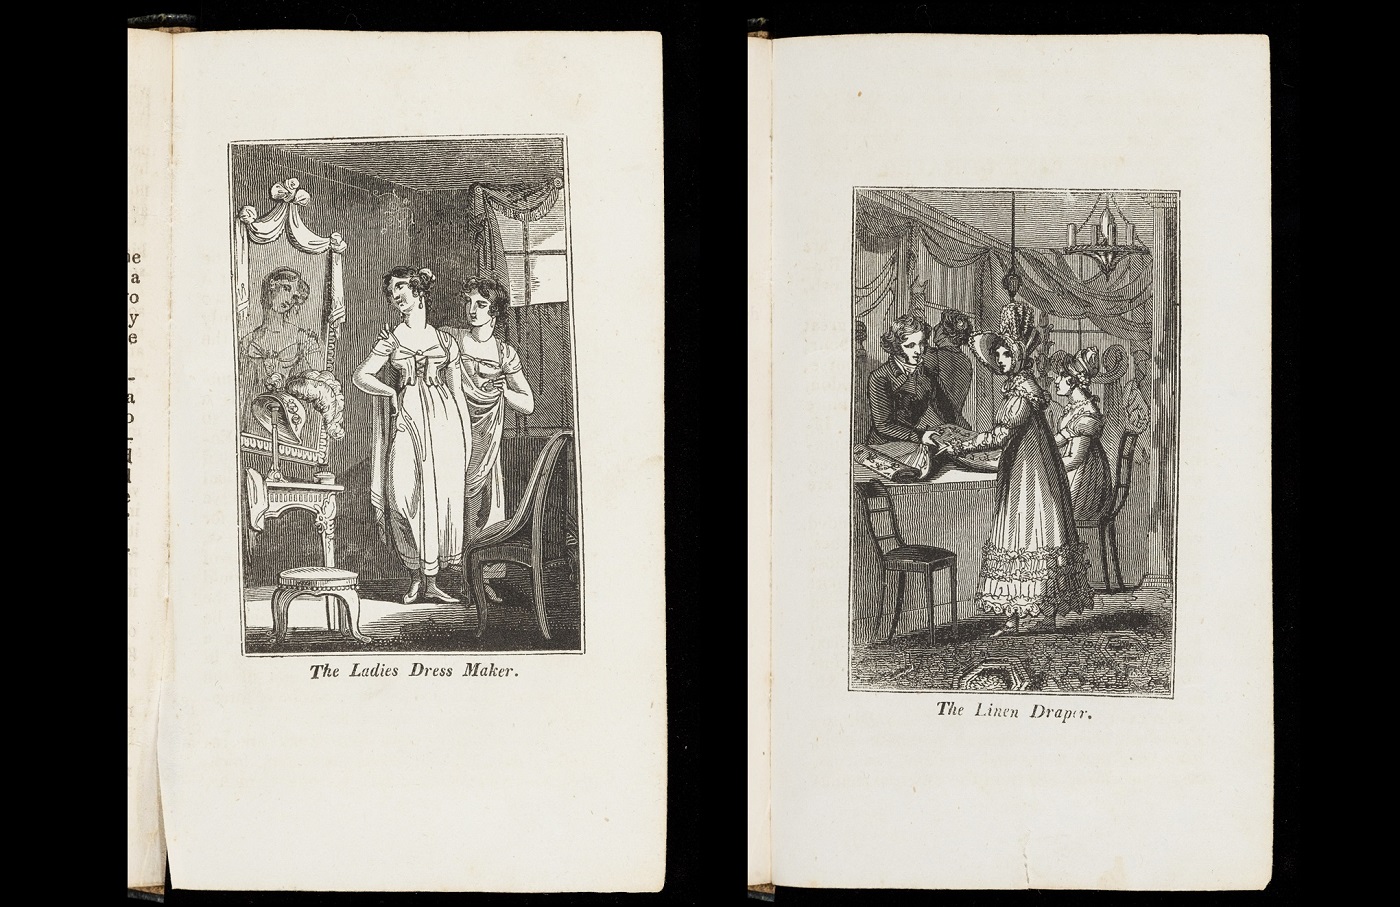 The Book of English trades, and library of the useful arts (London, 1818) Showing images of ‘The Ladies dress-maker’ and ‘The Linen-draper’ Bodleian Libraries, 1773 f.25